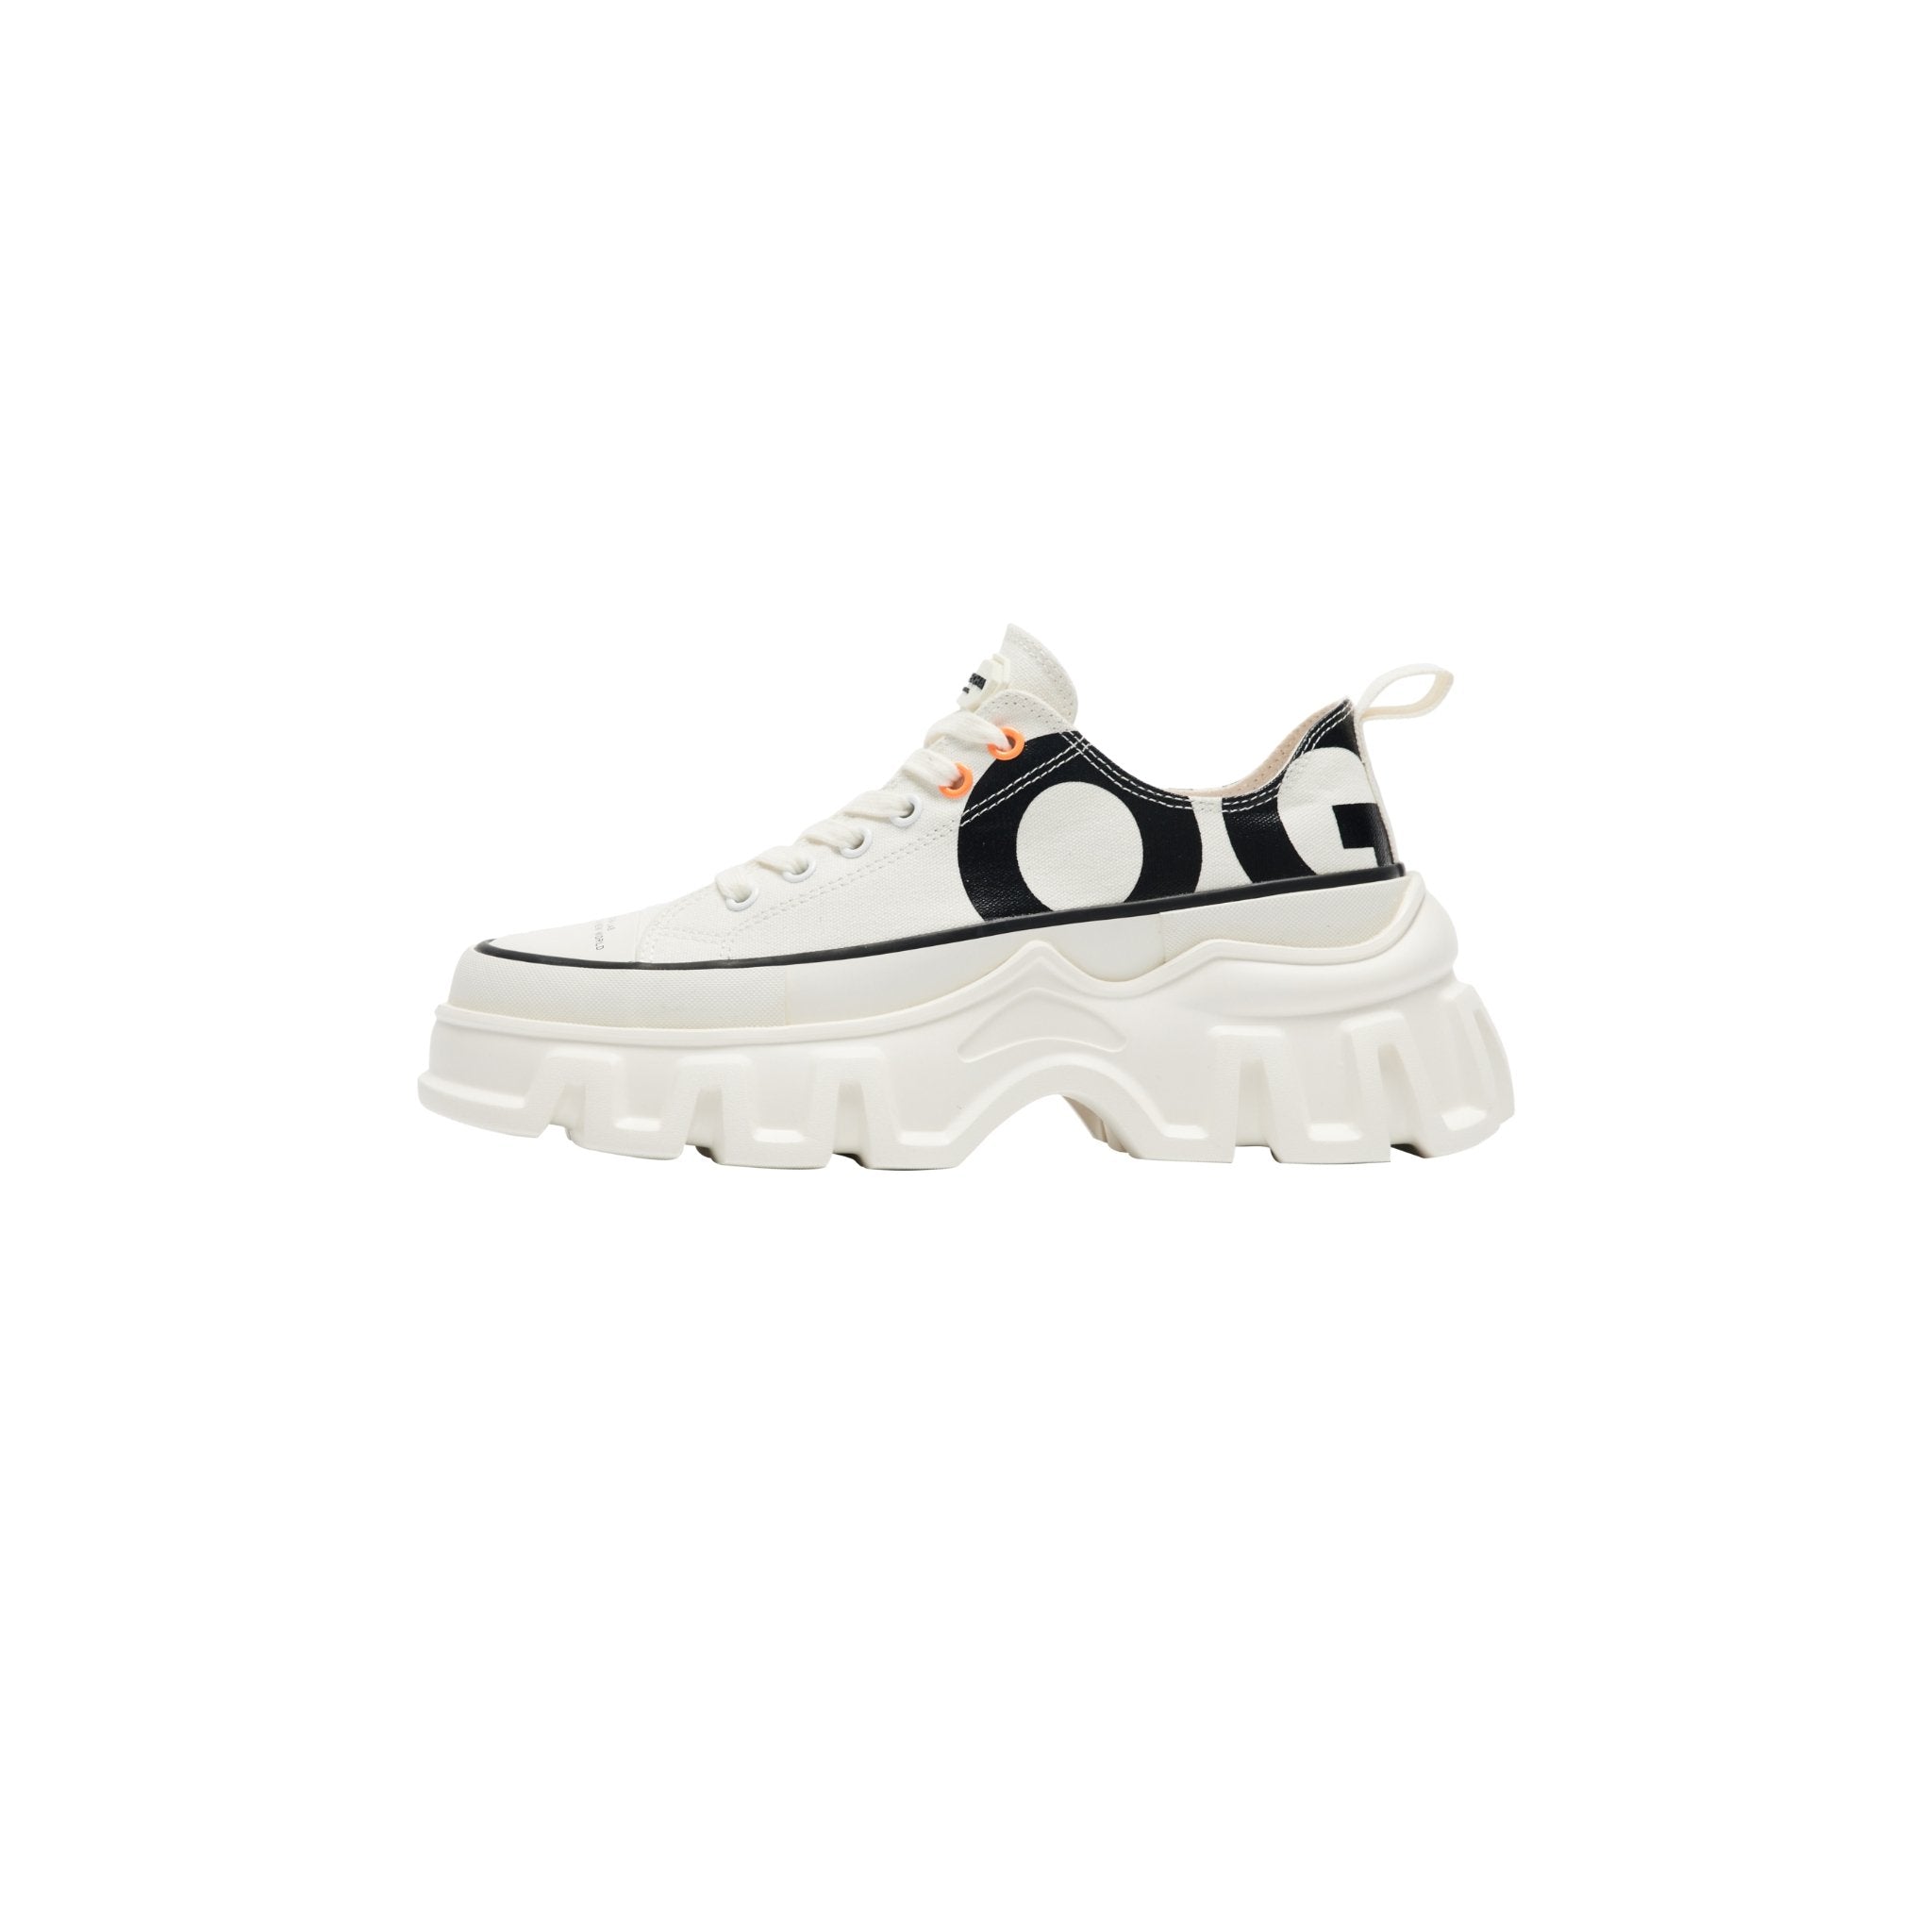 OGR SHEN FL Lows Prints Canvas Shoes White | MADA IN CHINA